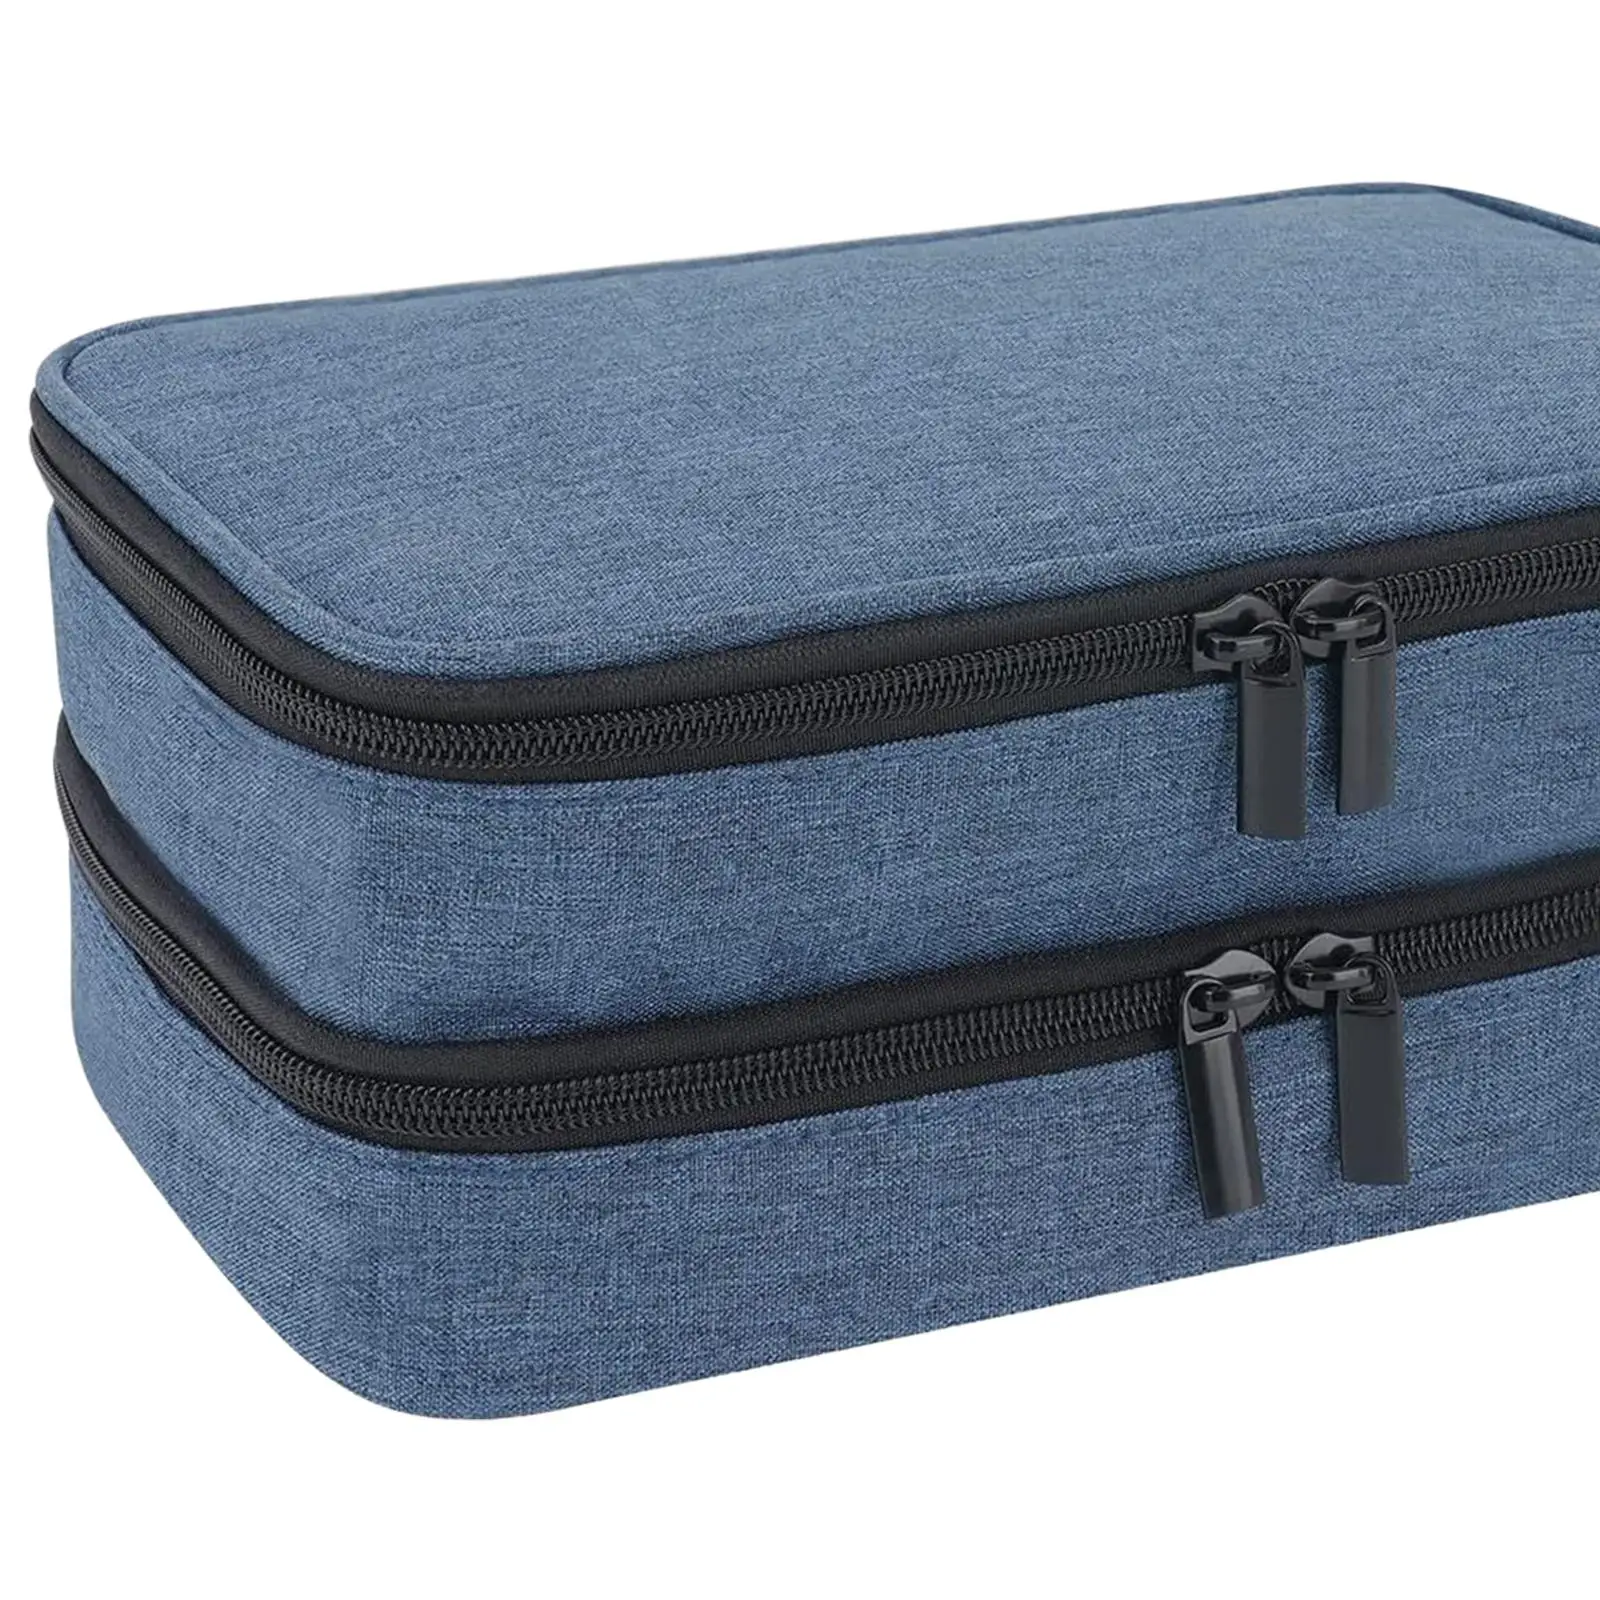 Cooler Travel Case Keep Cool Organizer Double Layers Convenient Cooler Pouch Insulation Storage Bag for Supplies Pens Ice Packs